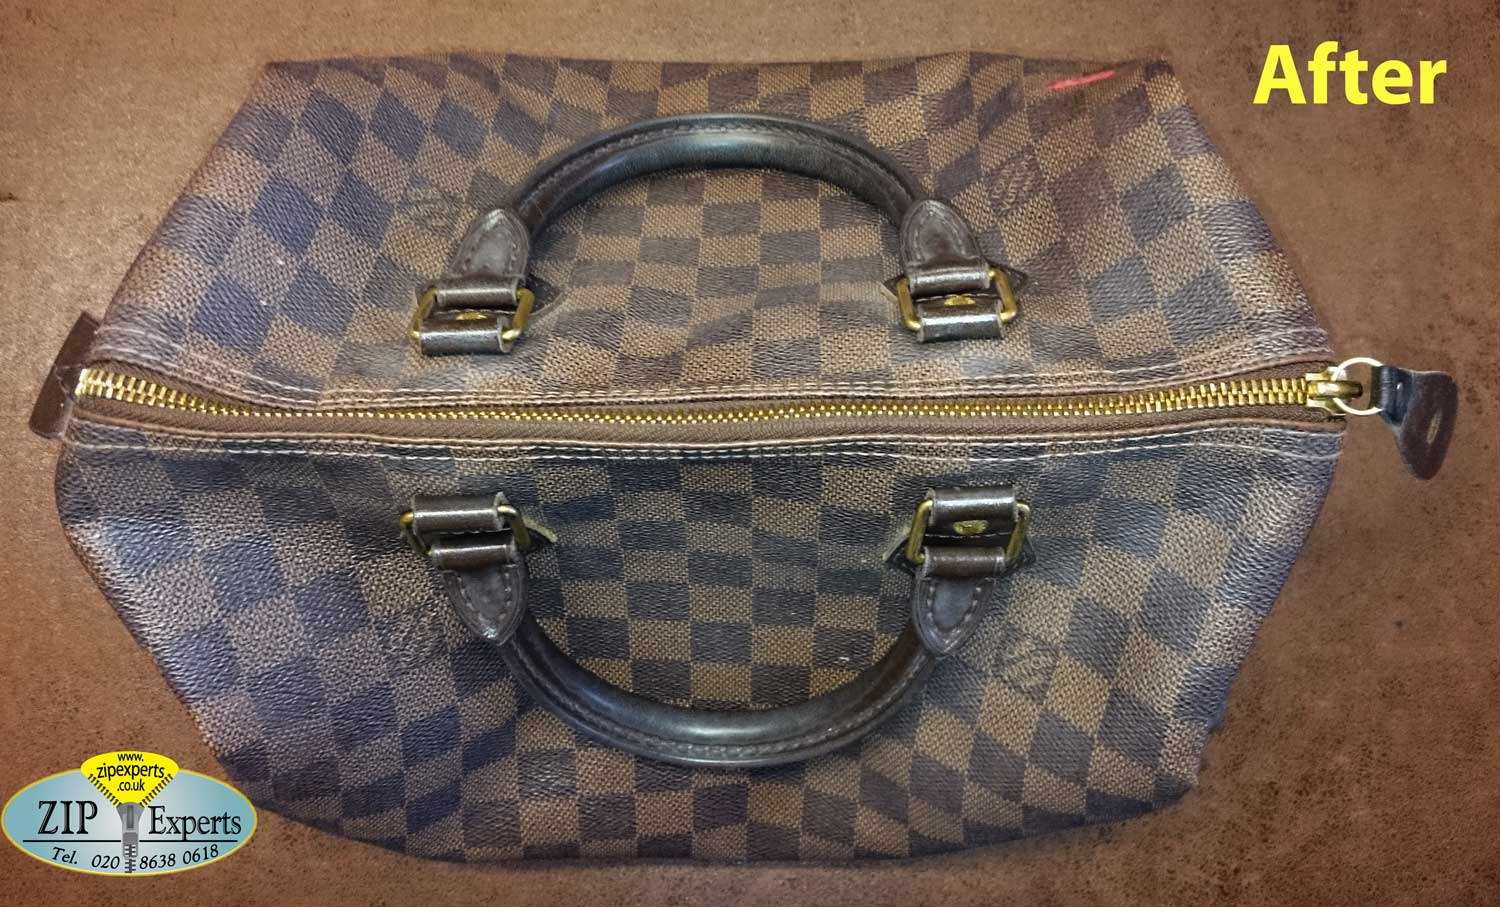 BagLab Manila - Puller replacement for this Louis Vuitton